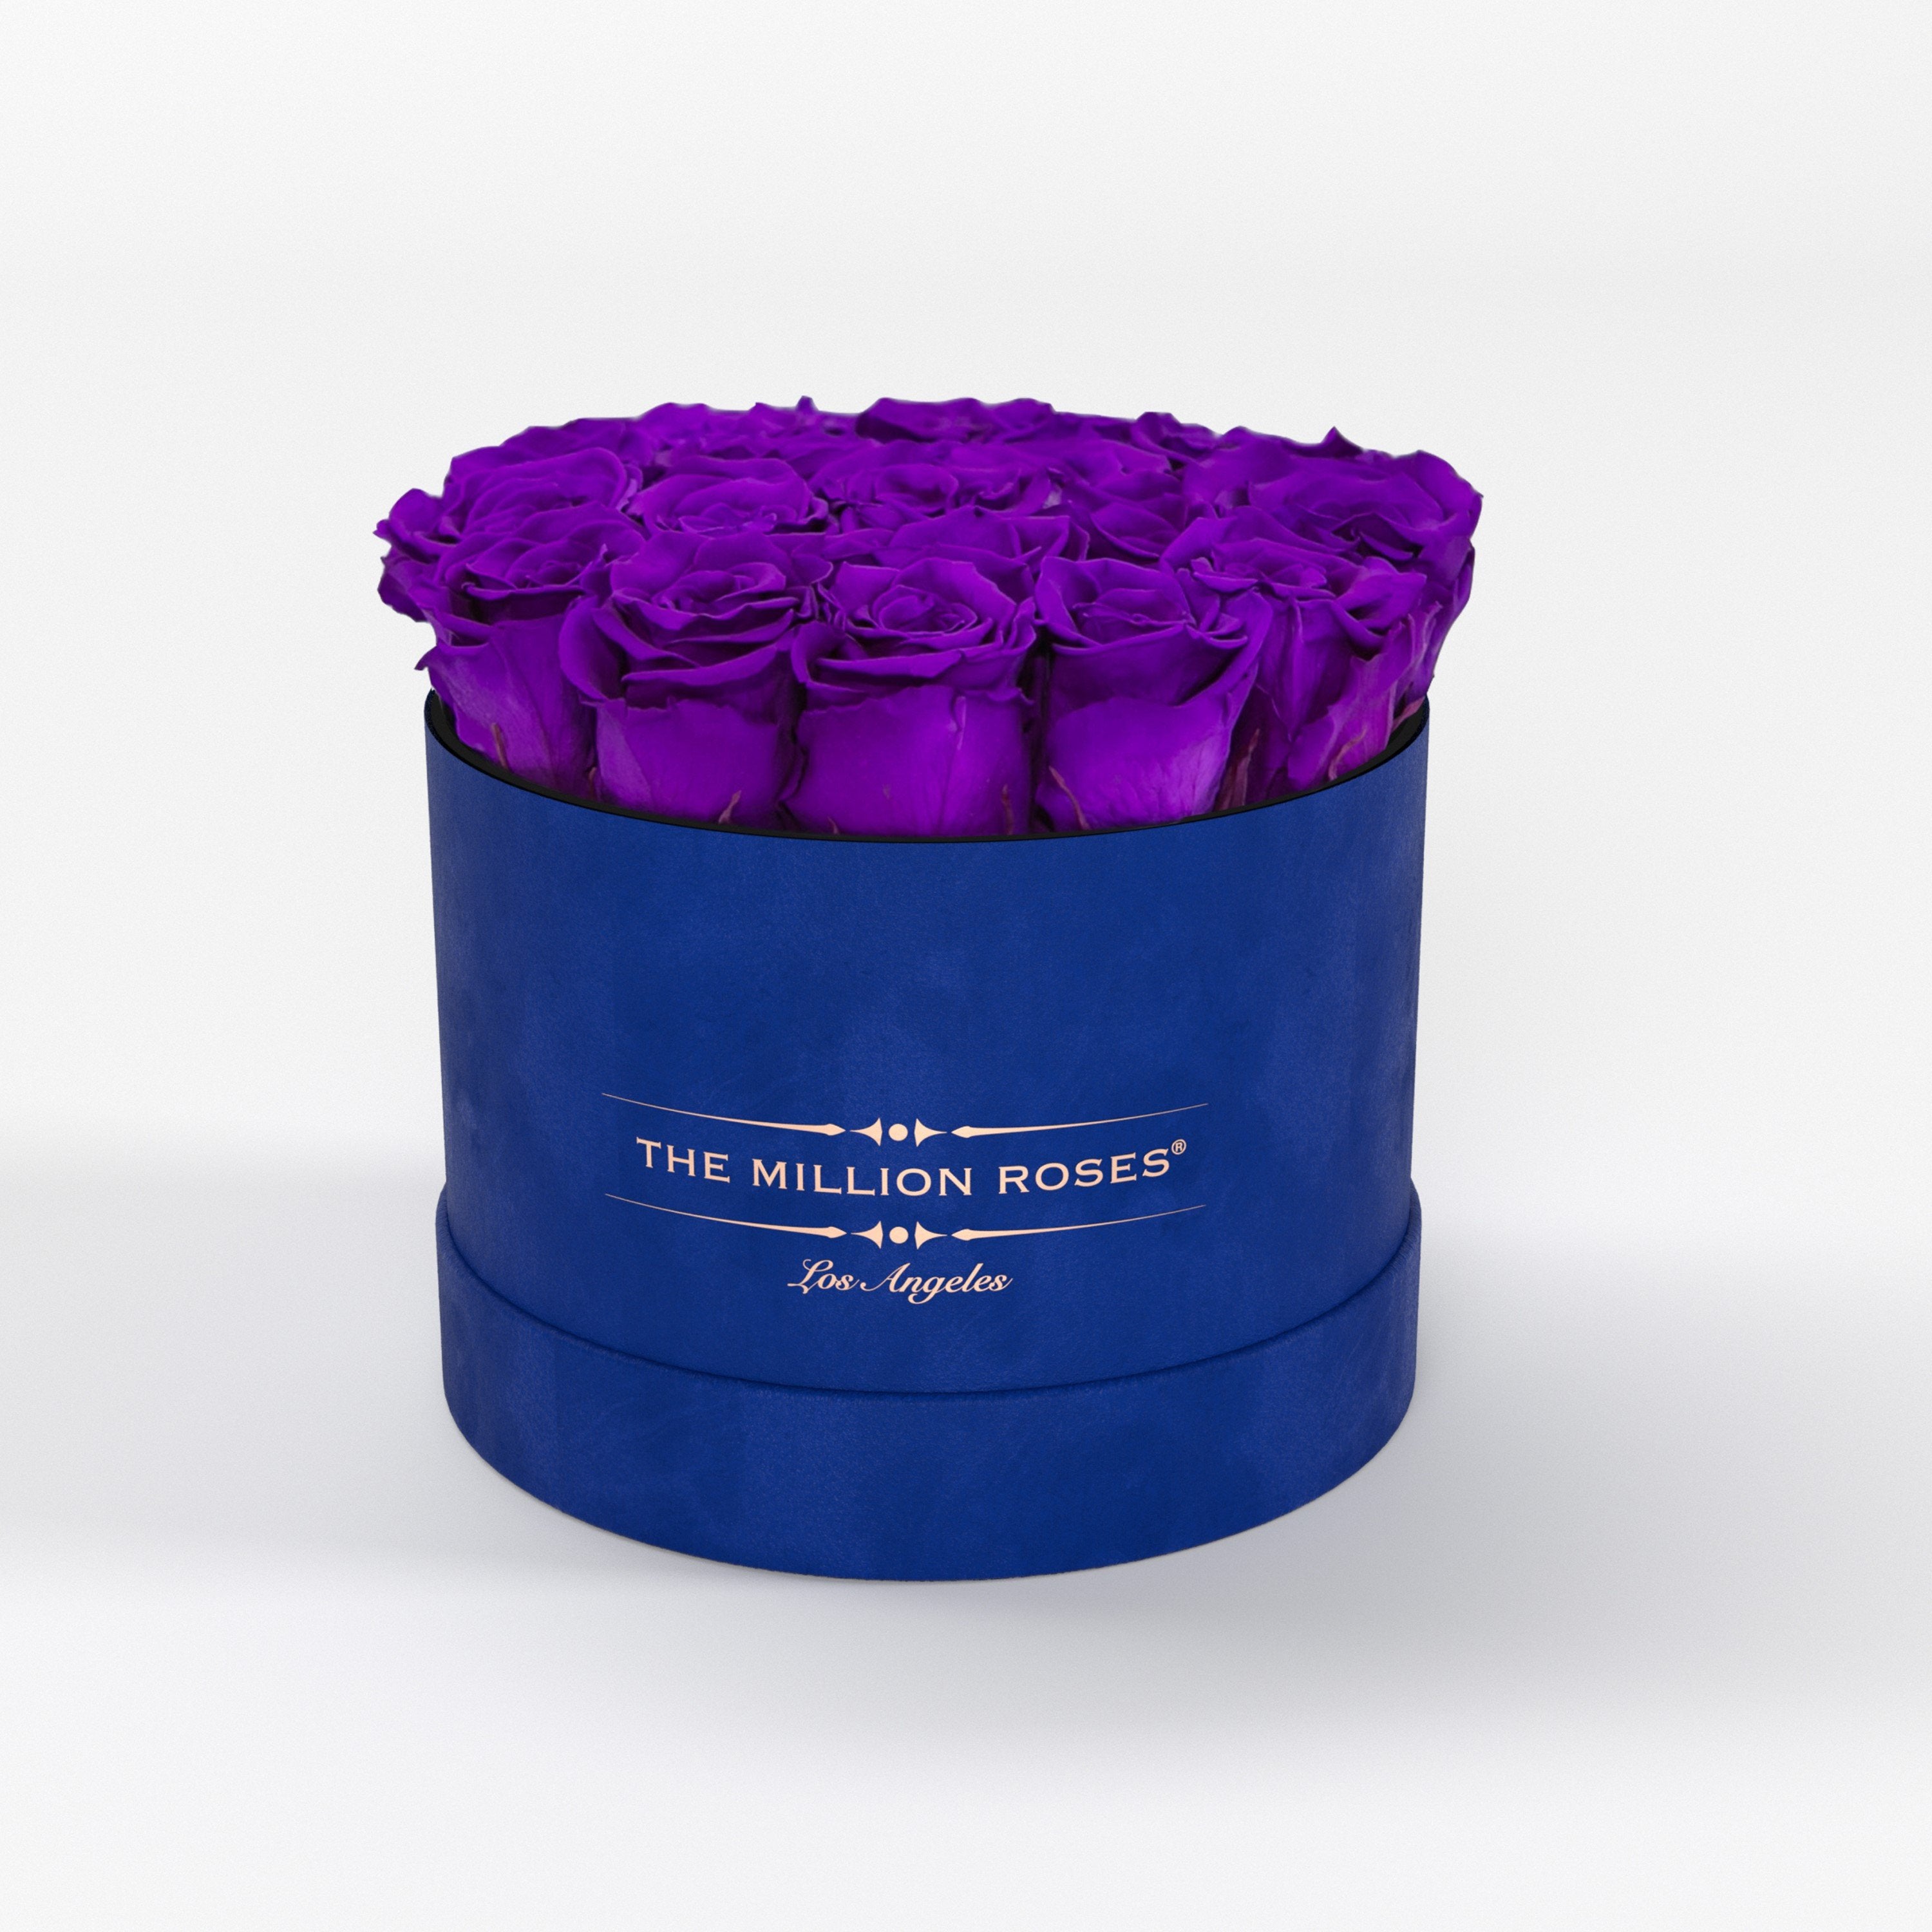 ( LA ) Blue - Suede - Classic Box with Bright Purple Roses Kit - the million roses